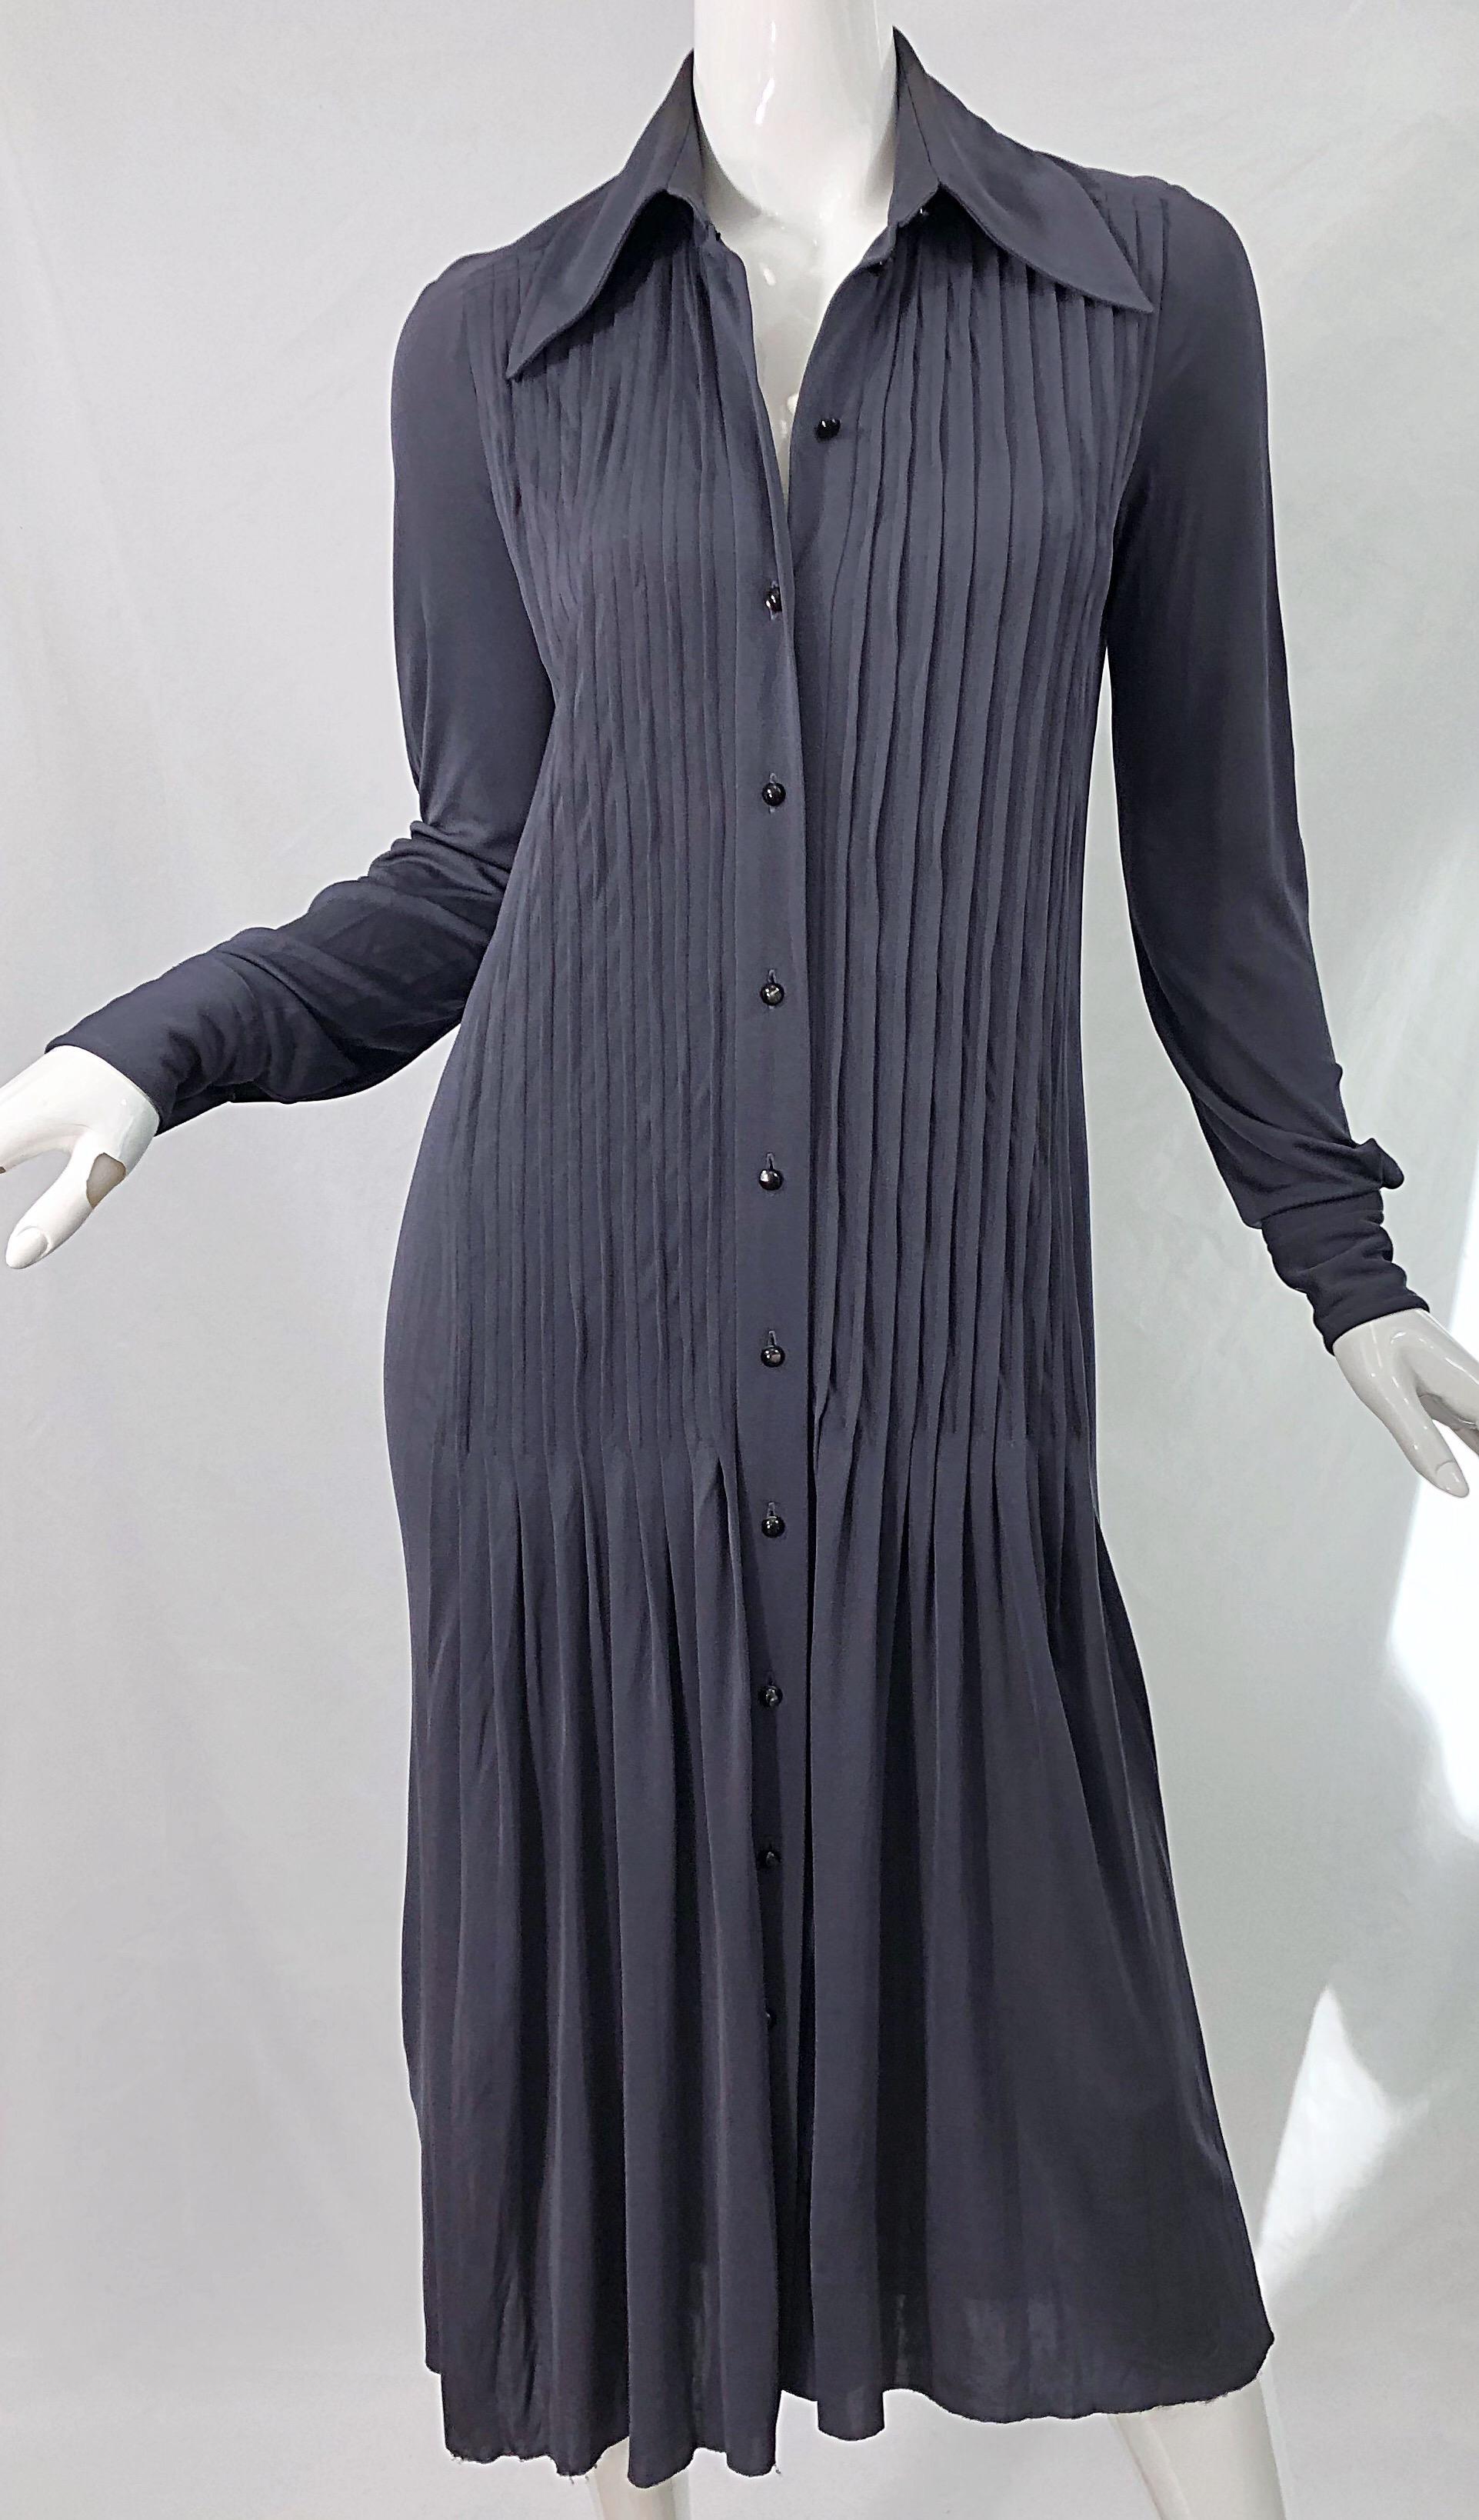 Marc Jacobs for Bergdorf Goodman 1920s Flapper Style Gray 20s Rayon Shirt Dress In Good Condition For Sale In San Diego, CA